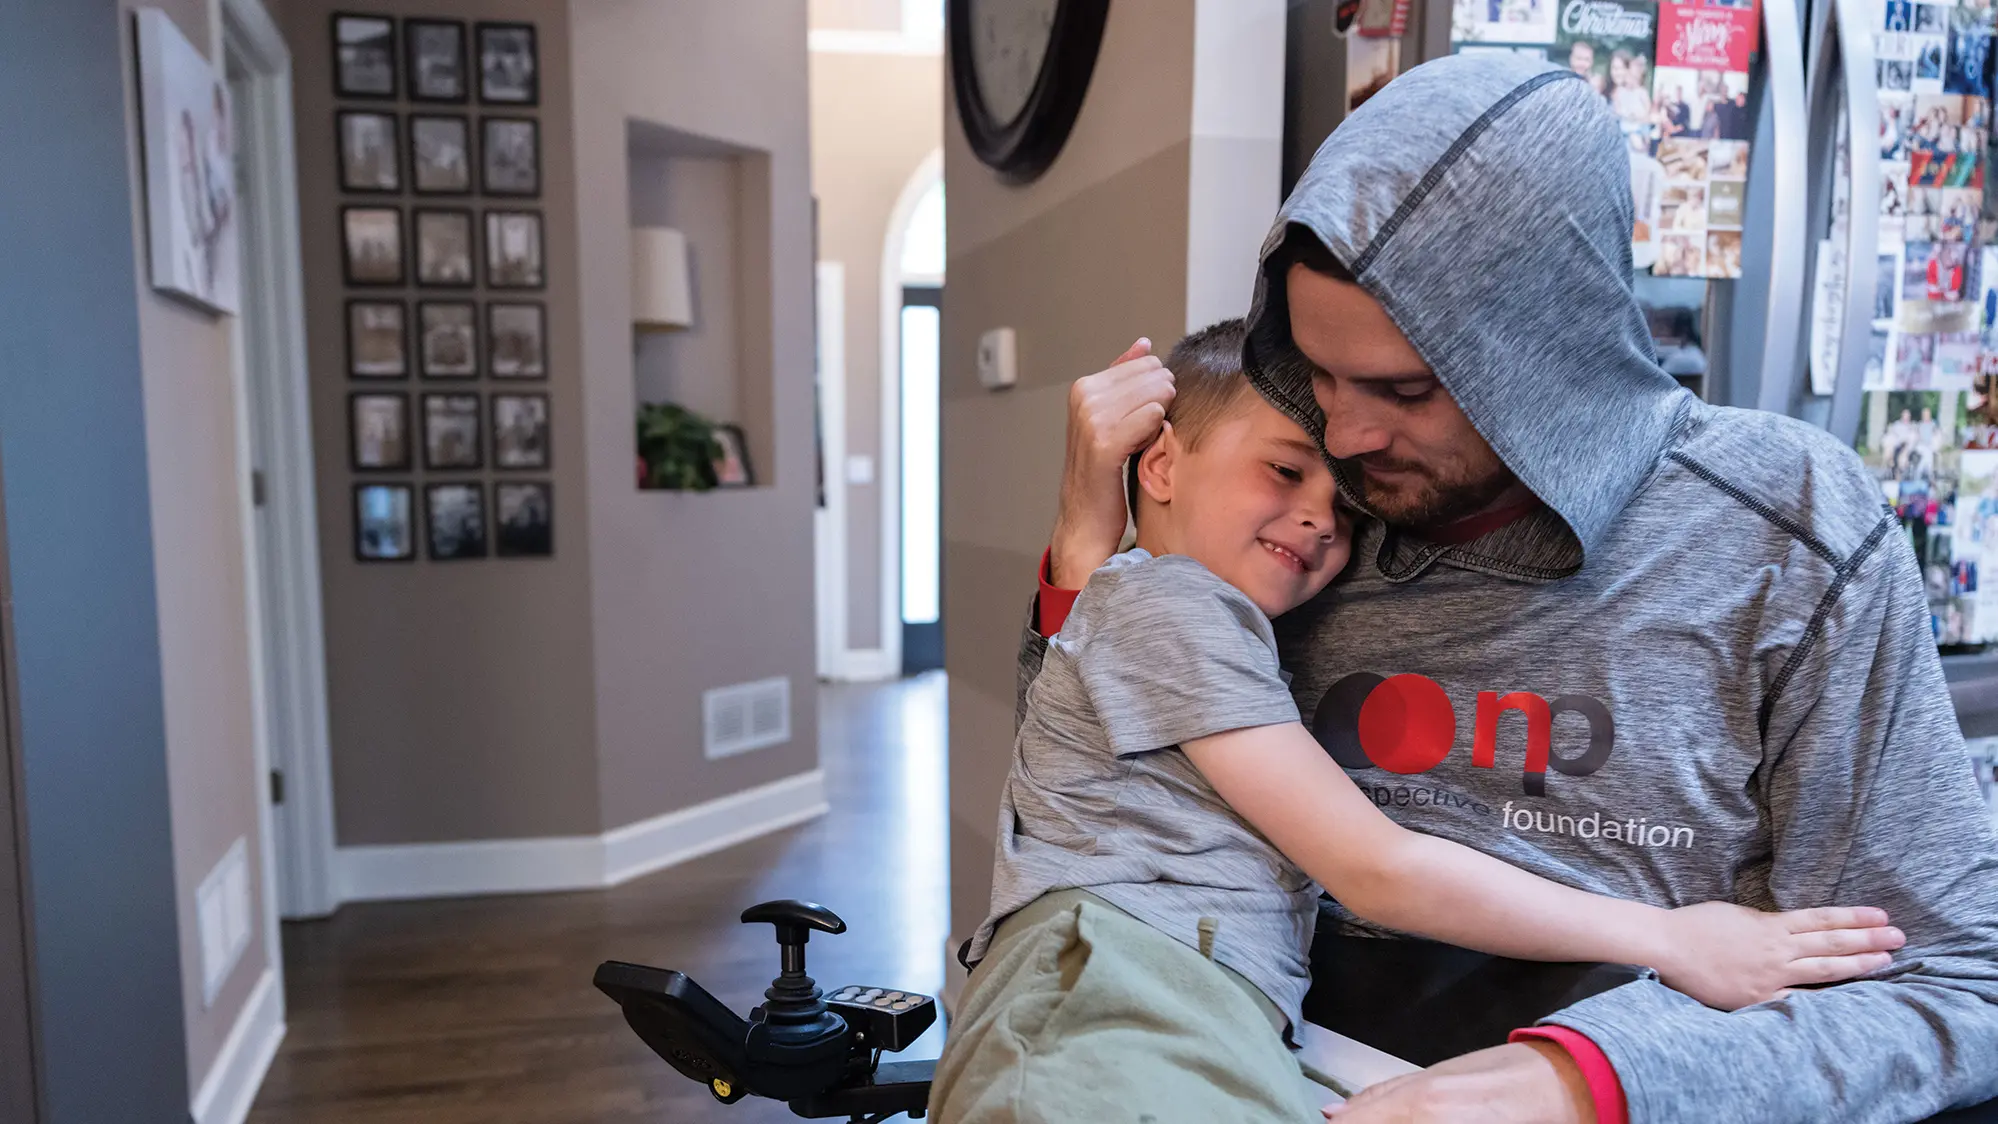 A young boy smiles as he sits on the lap of his dad, Tyson Gentry, and hugs him. Tyson, a white, bearded, lanky man, has the arms of his wheelchair spread wider than usual and has the hood of his sweatshirt up. They’re in their home, where the walls and fridge in the background are covered in family photos.